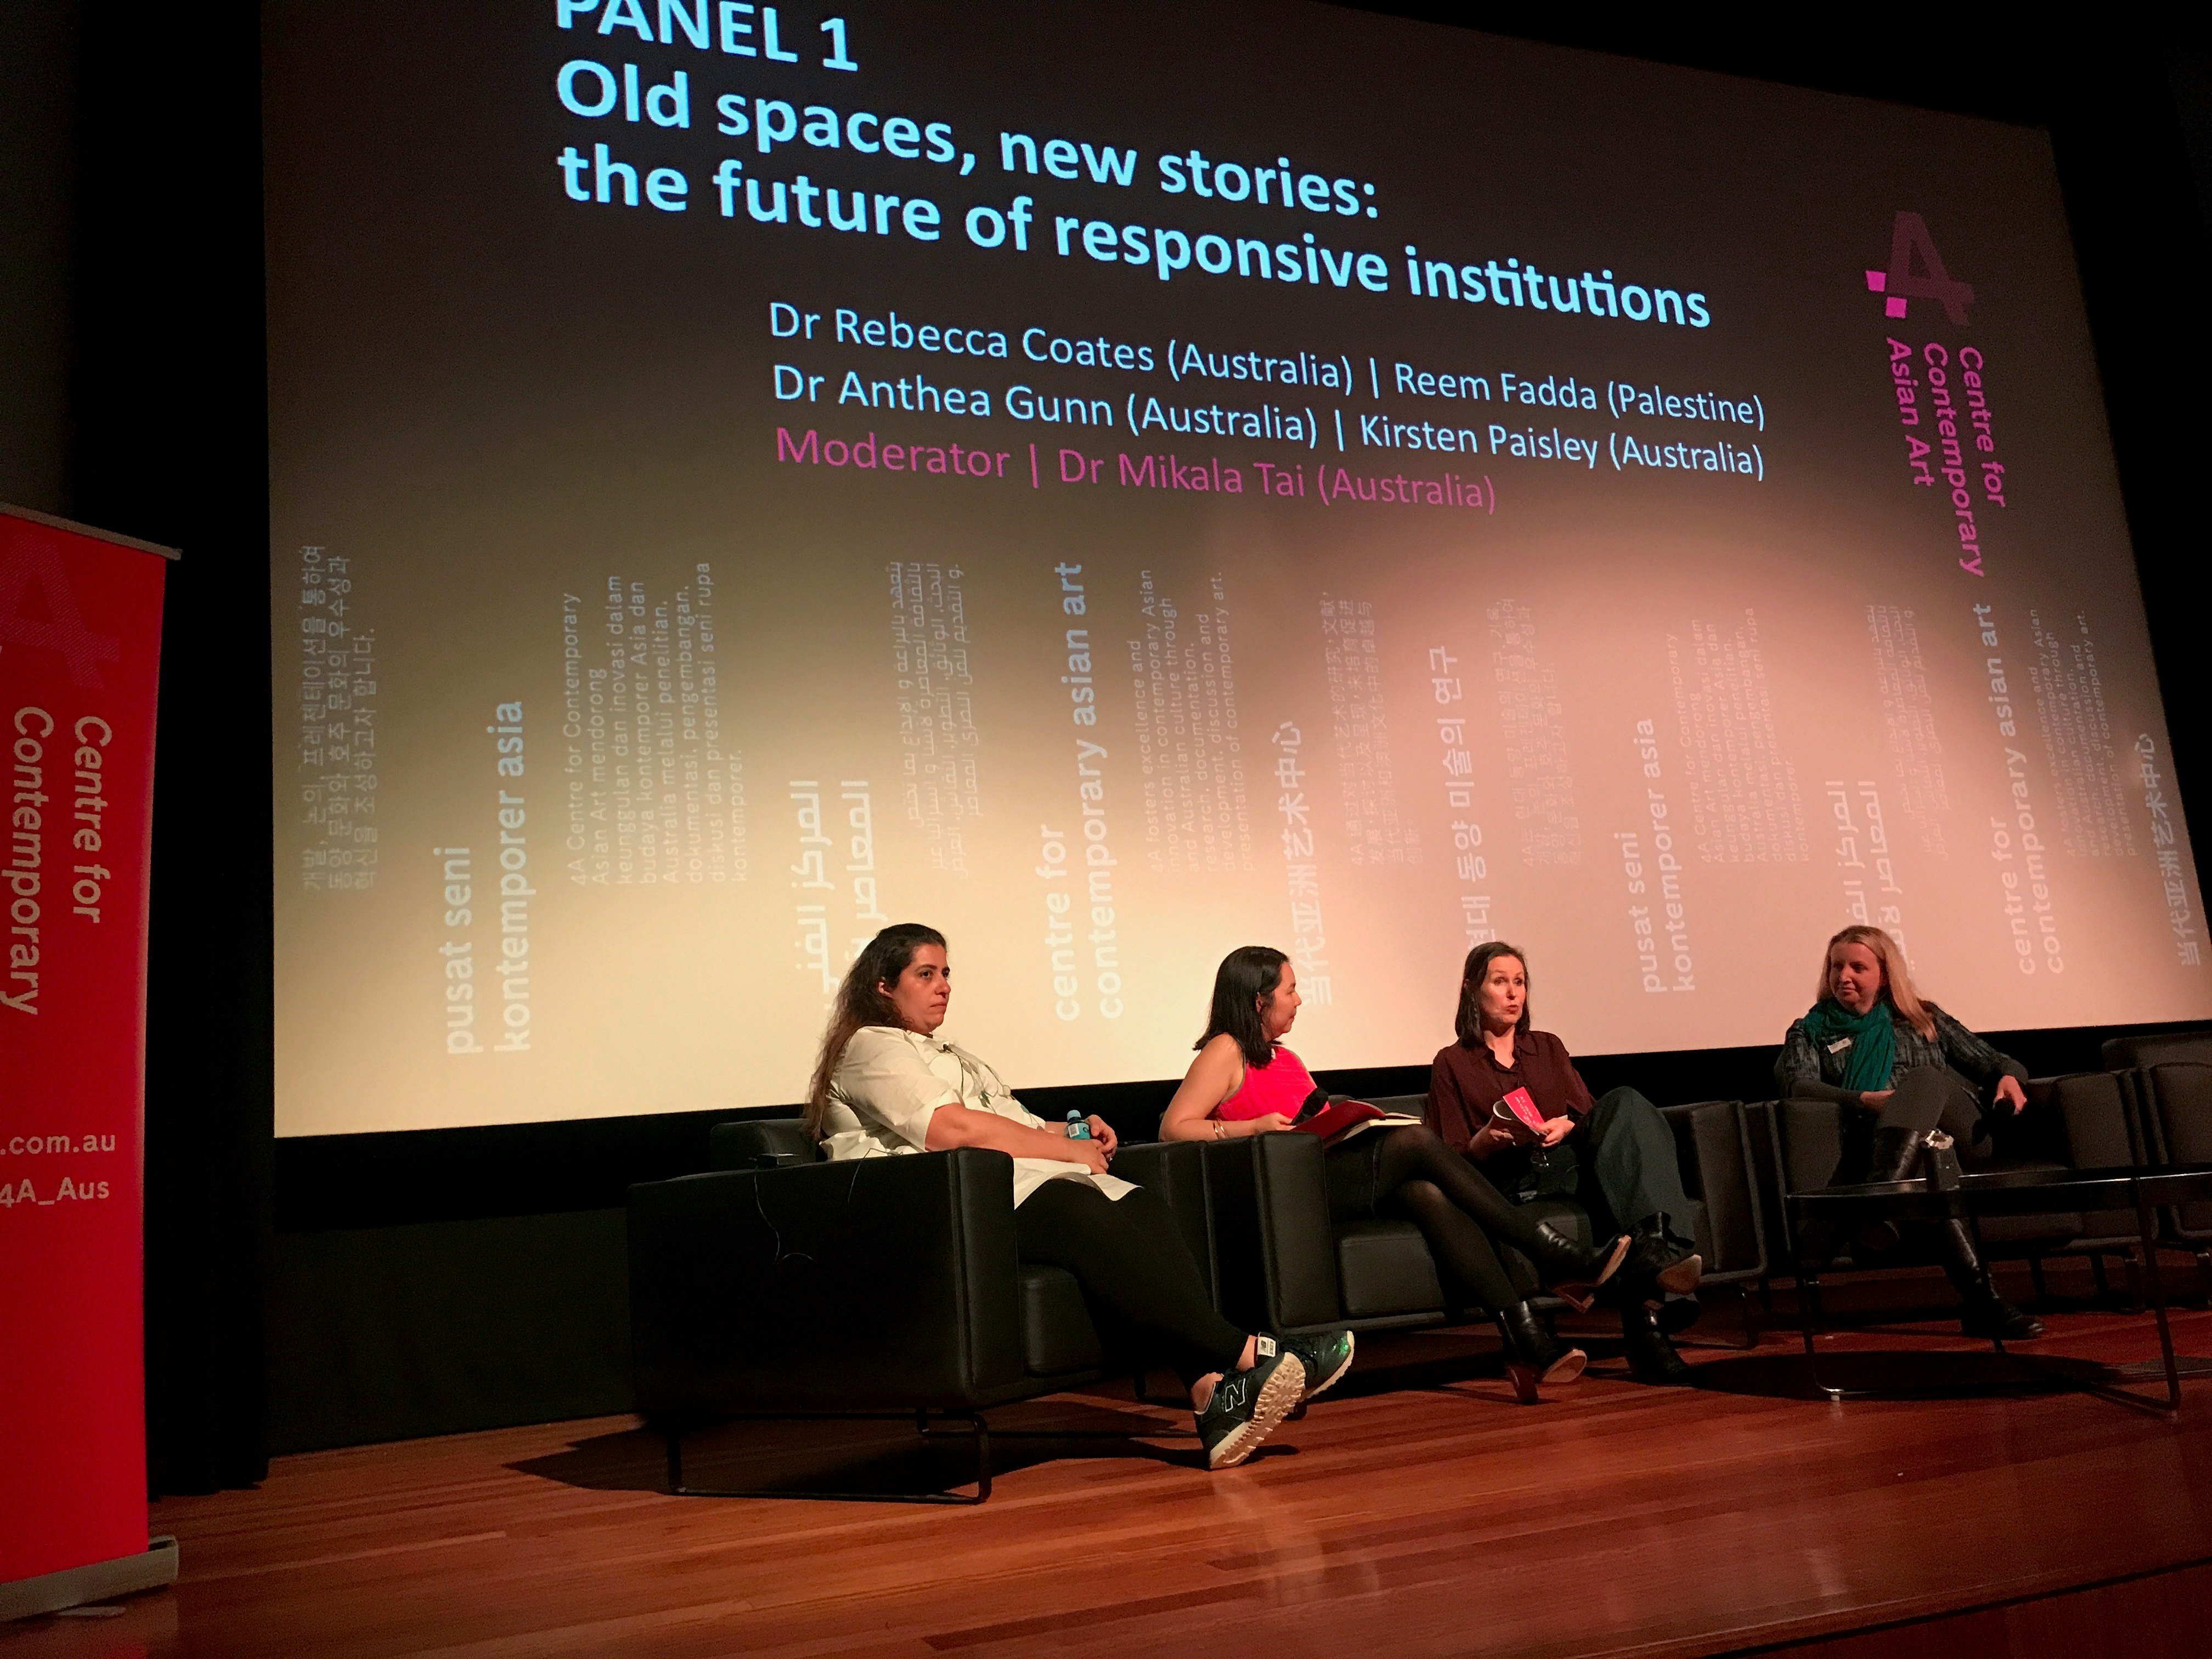 Four female-presenting figures seated on a stage, behind them a large projector screen that says, Panel 1: Old spaces, new stories: the future of responsive institutions.